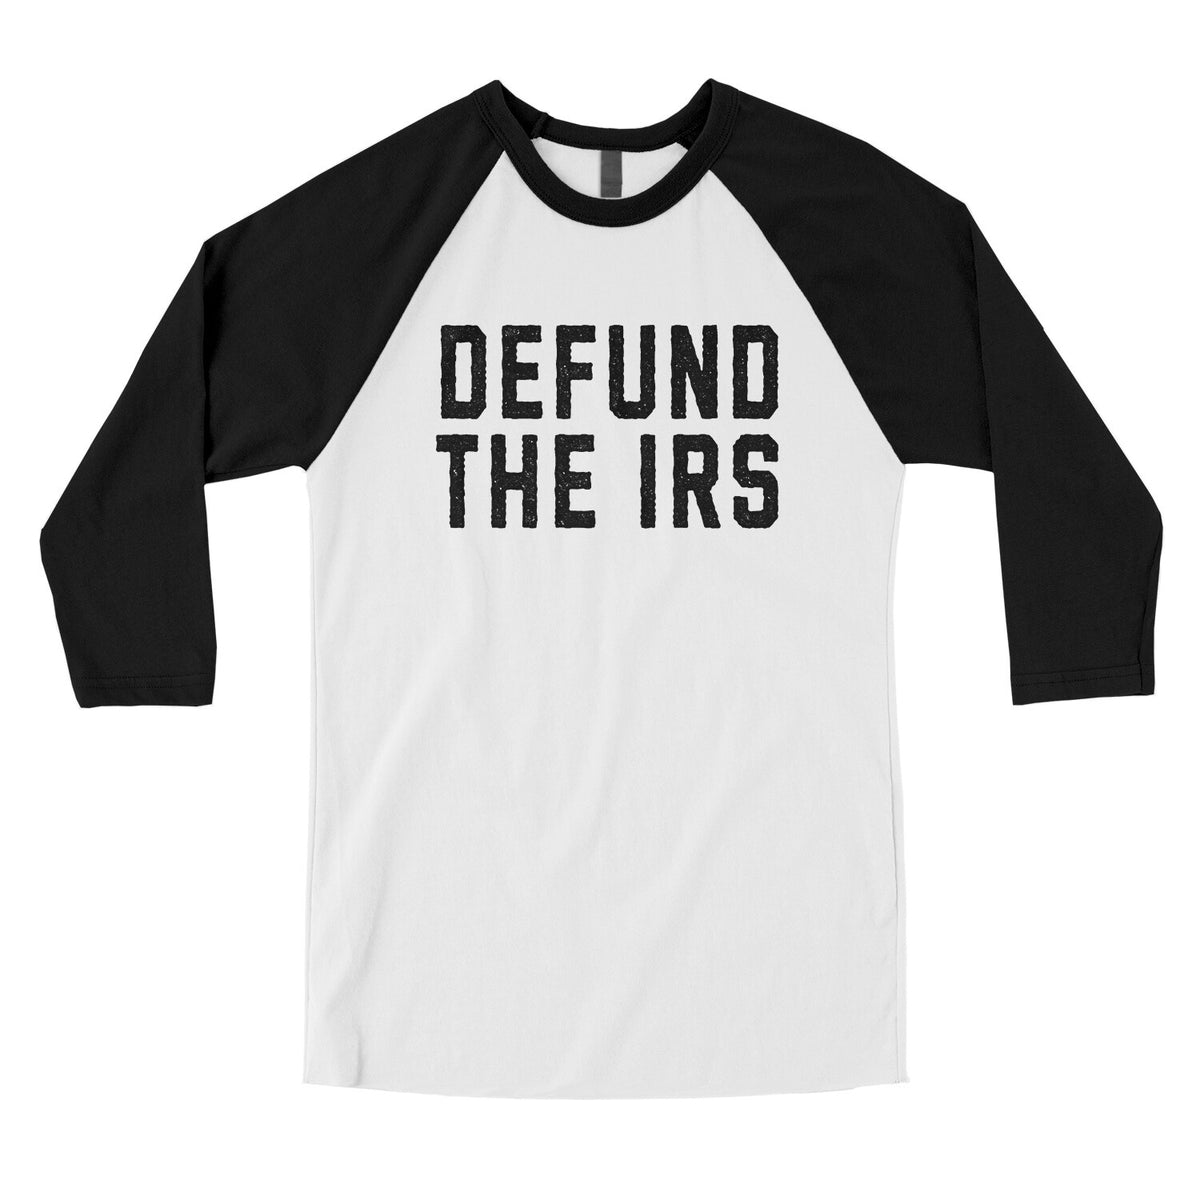 Defund the IRS in White with Black Color